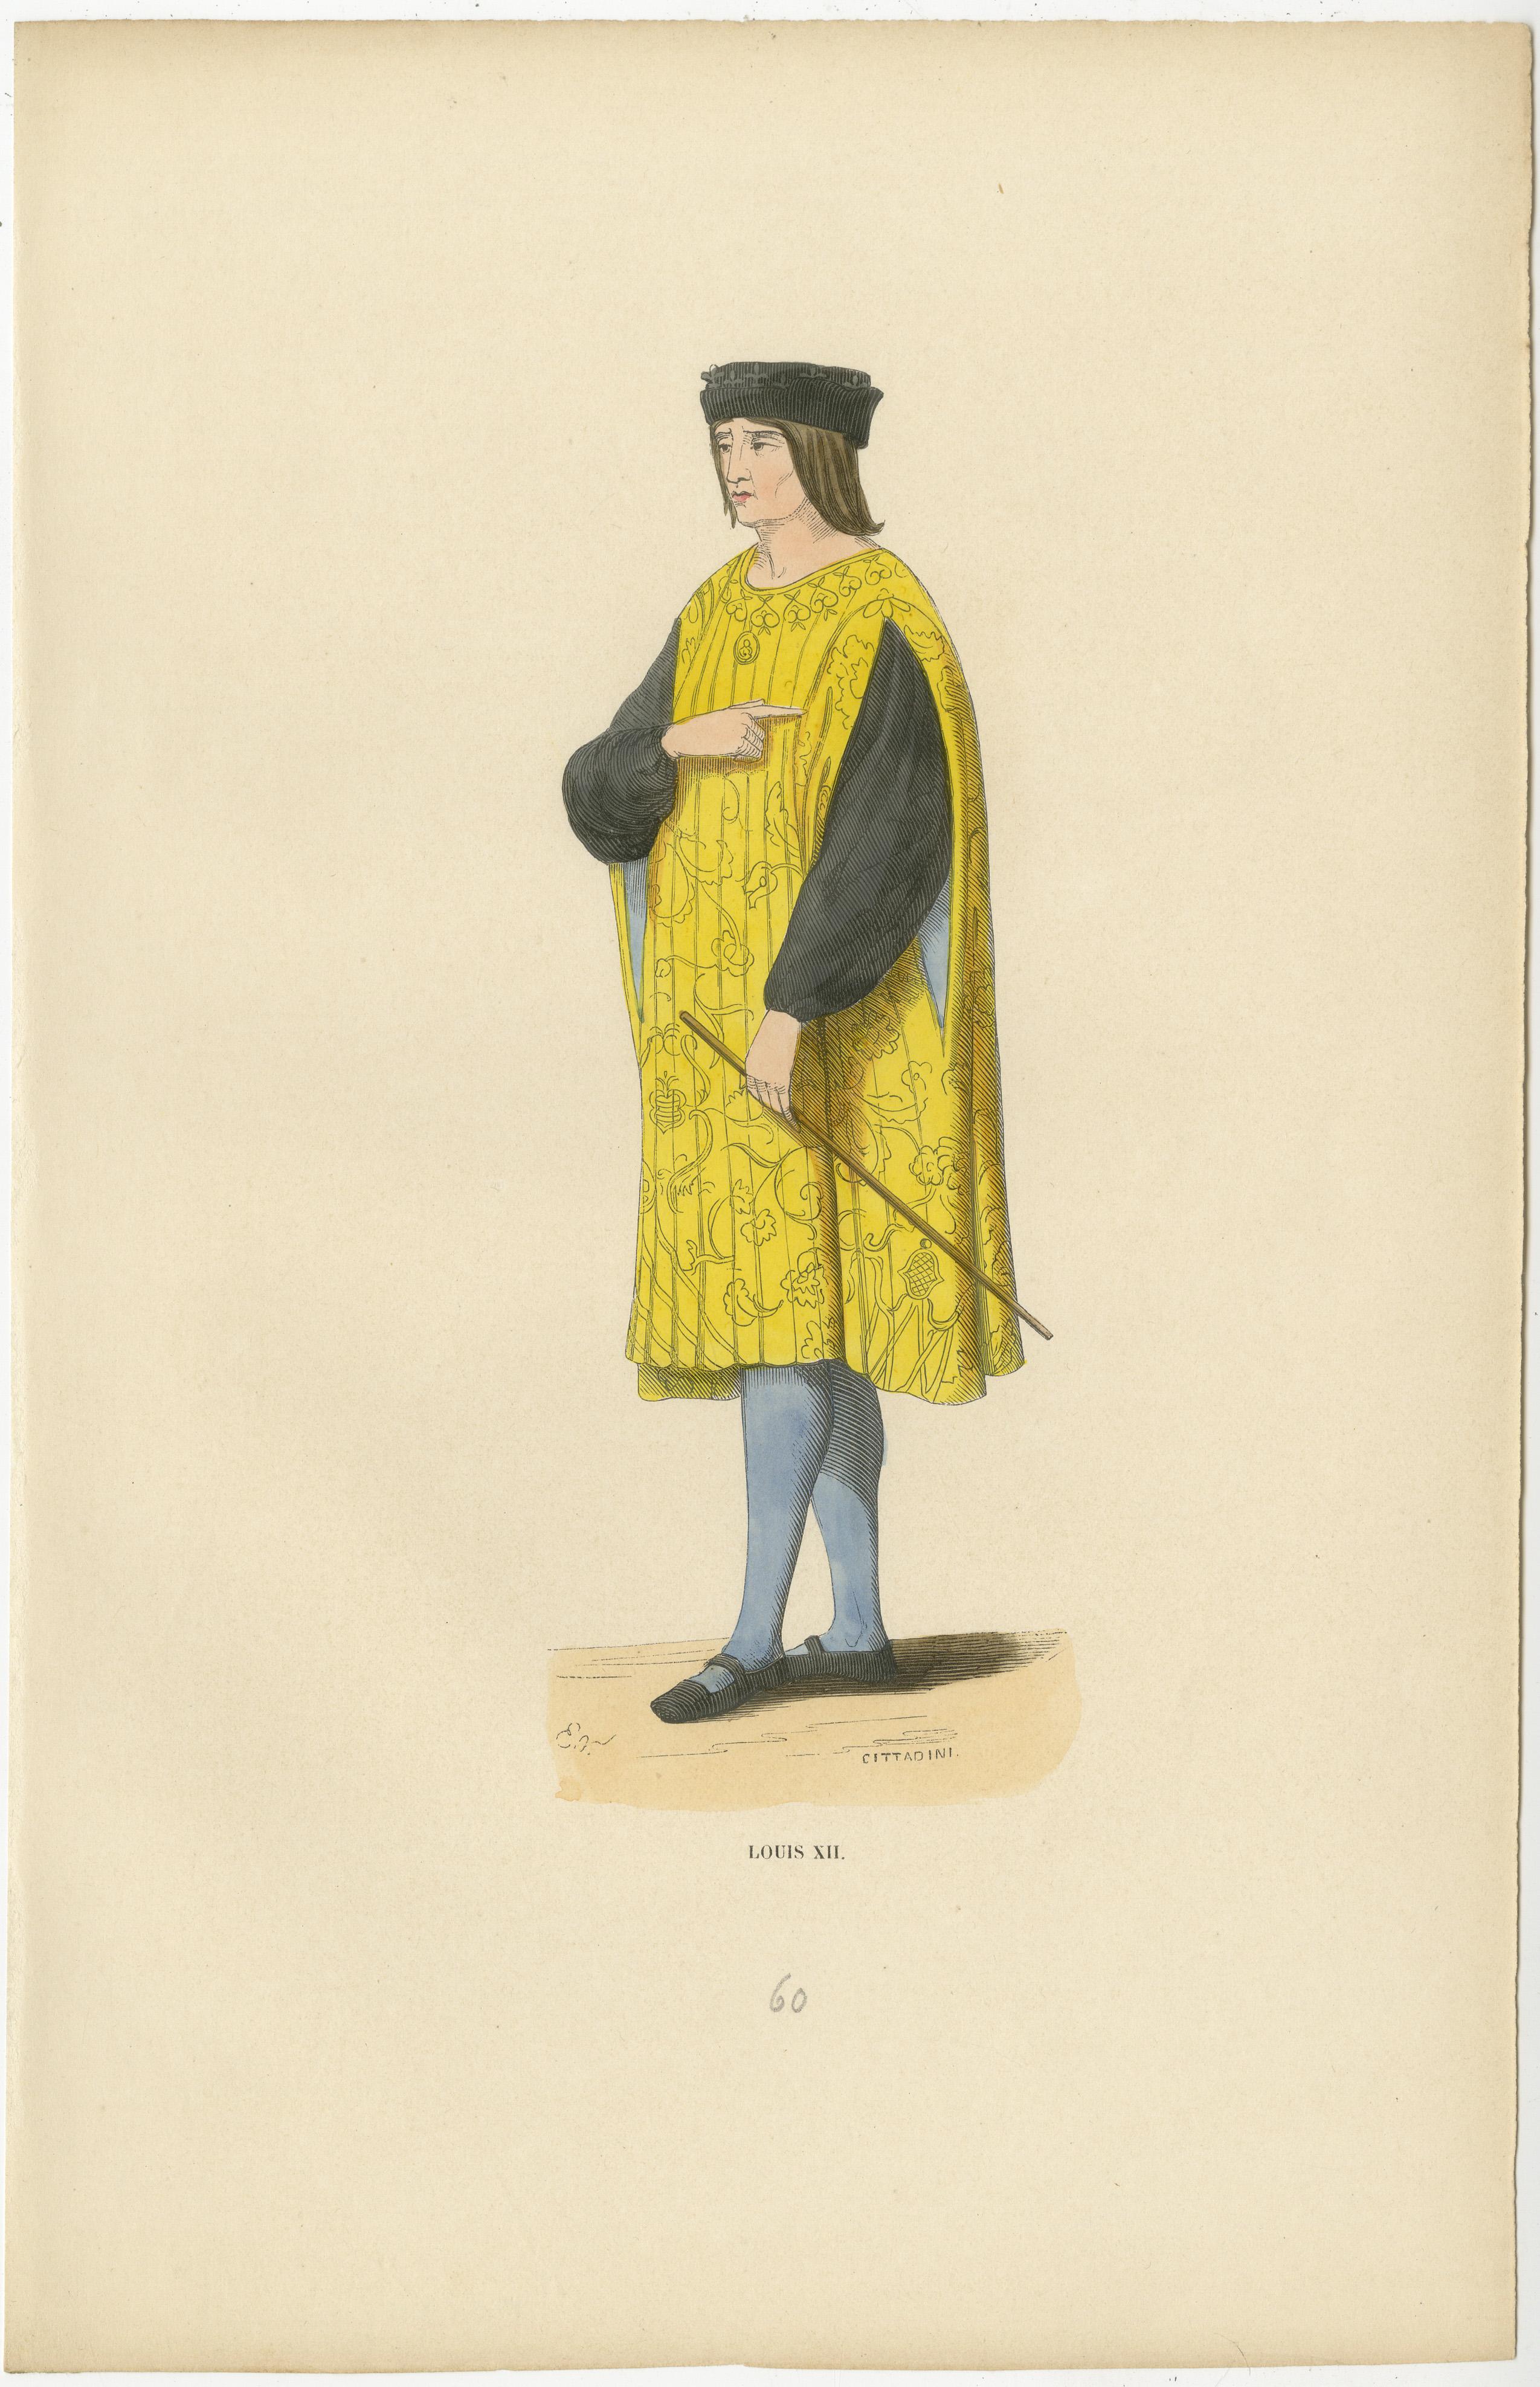 This print presents a dignified portrait of Louis XII, King of France, known for his prudent and just reign. Standing in profile, the king is depicted in royal attire that is both lavish and emblematic of his status.

He is wearing a long, richly